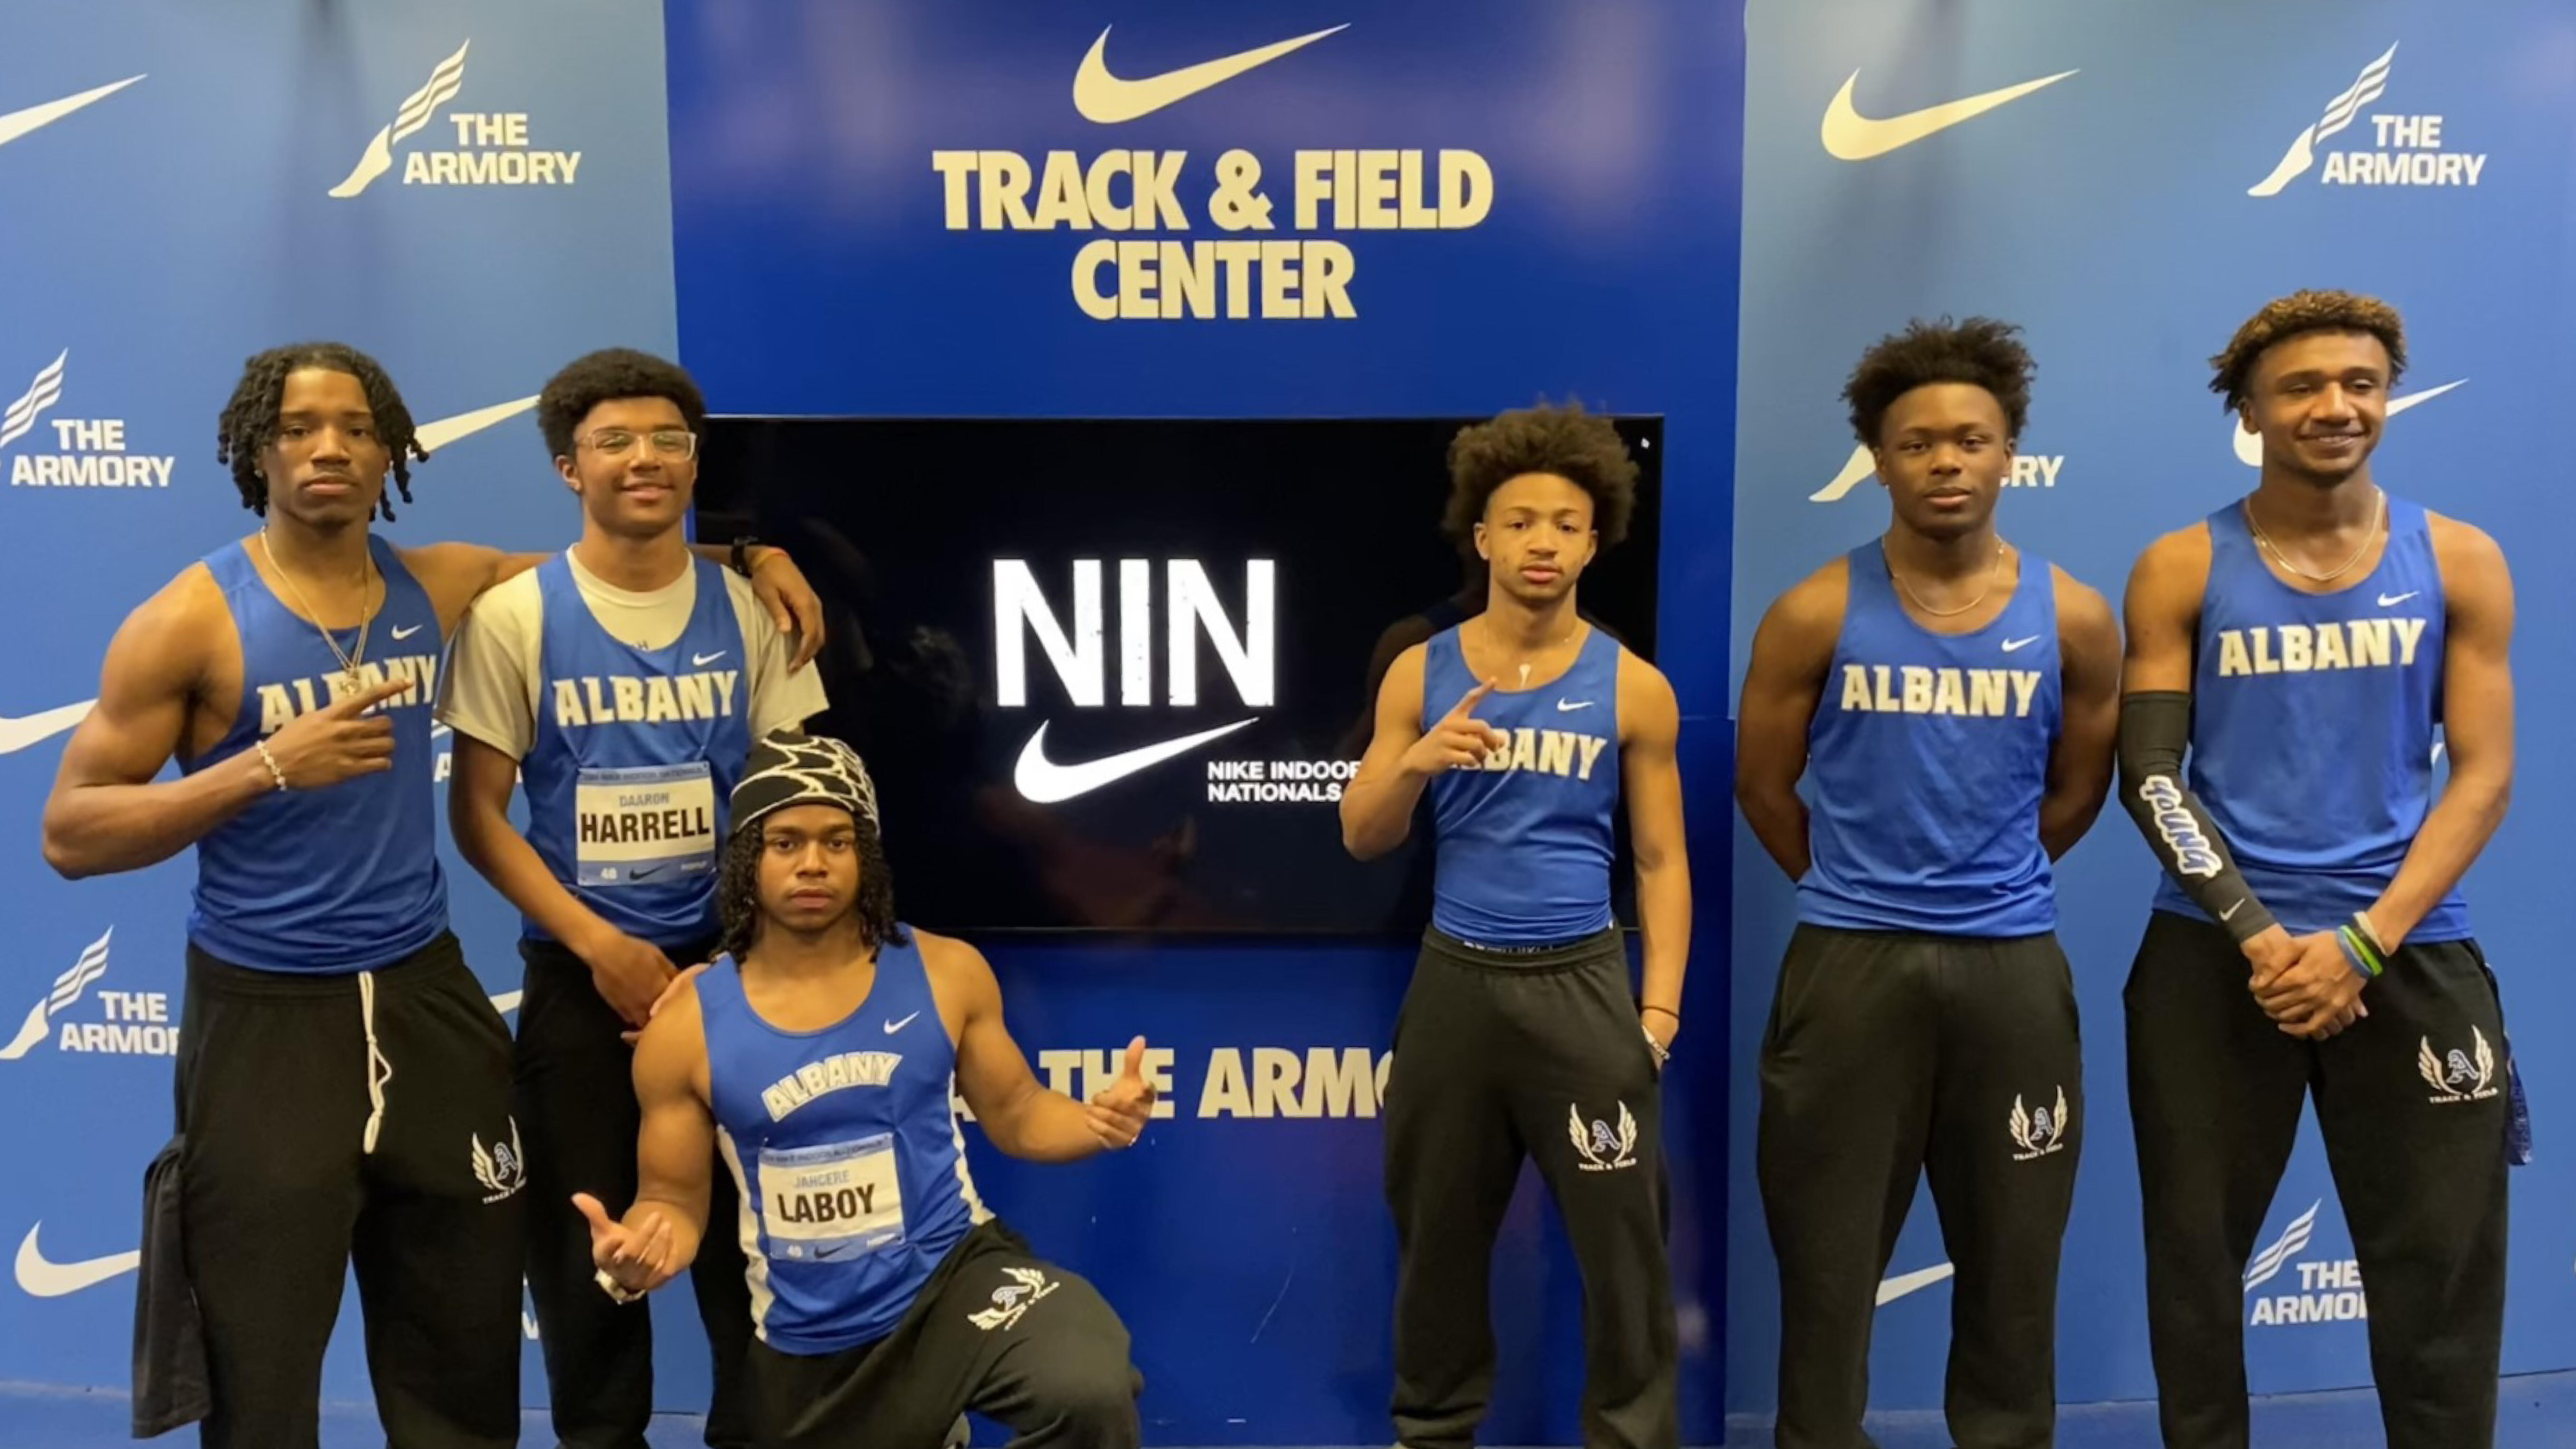 Albany High track members posing for a photo in front of the Nike backdrop